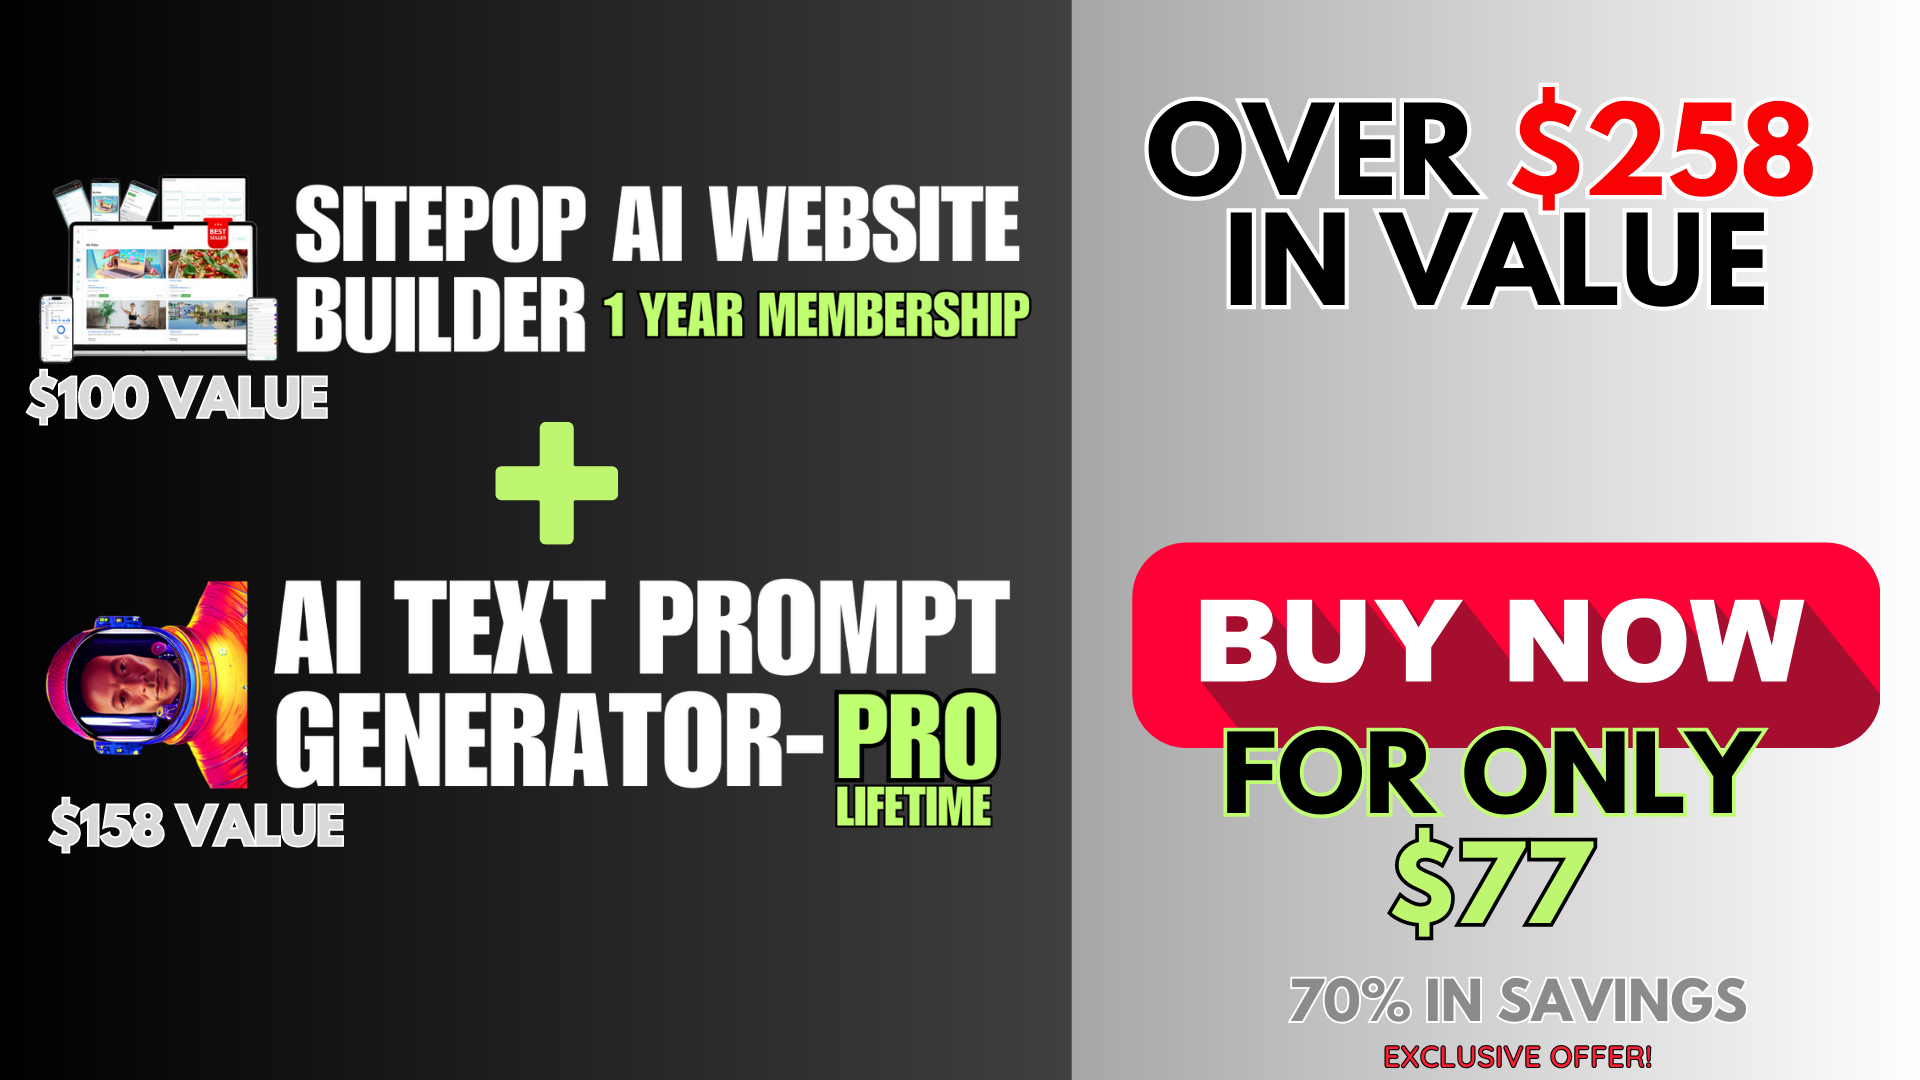 The SitePop and AI Text Prompt Generator Master Bundle